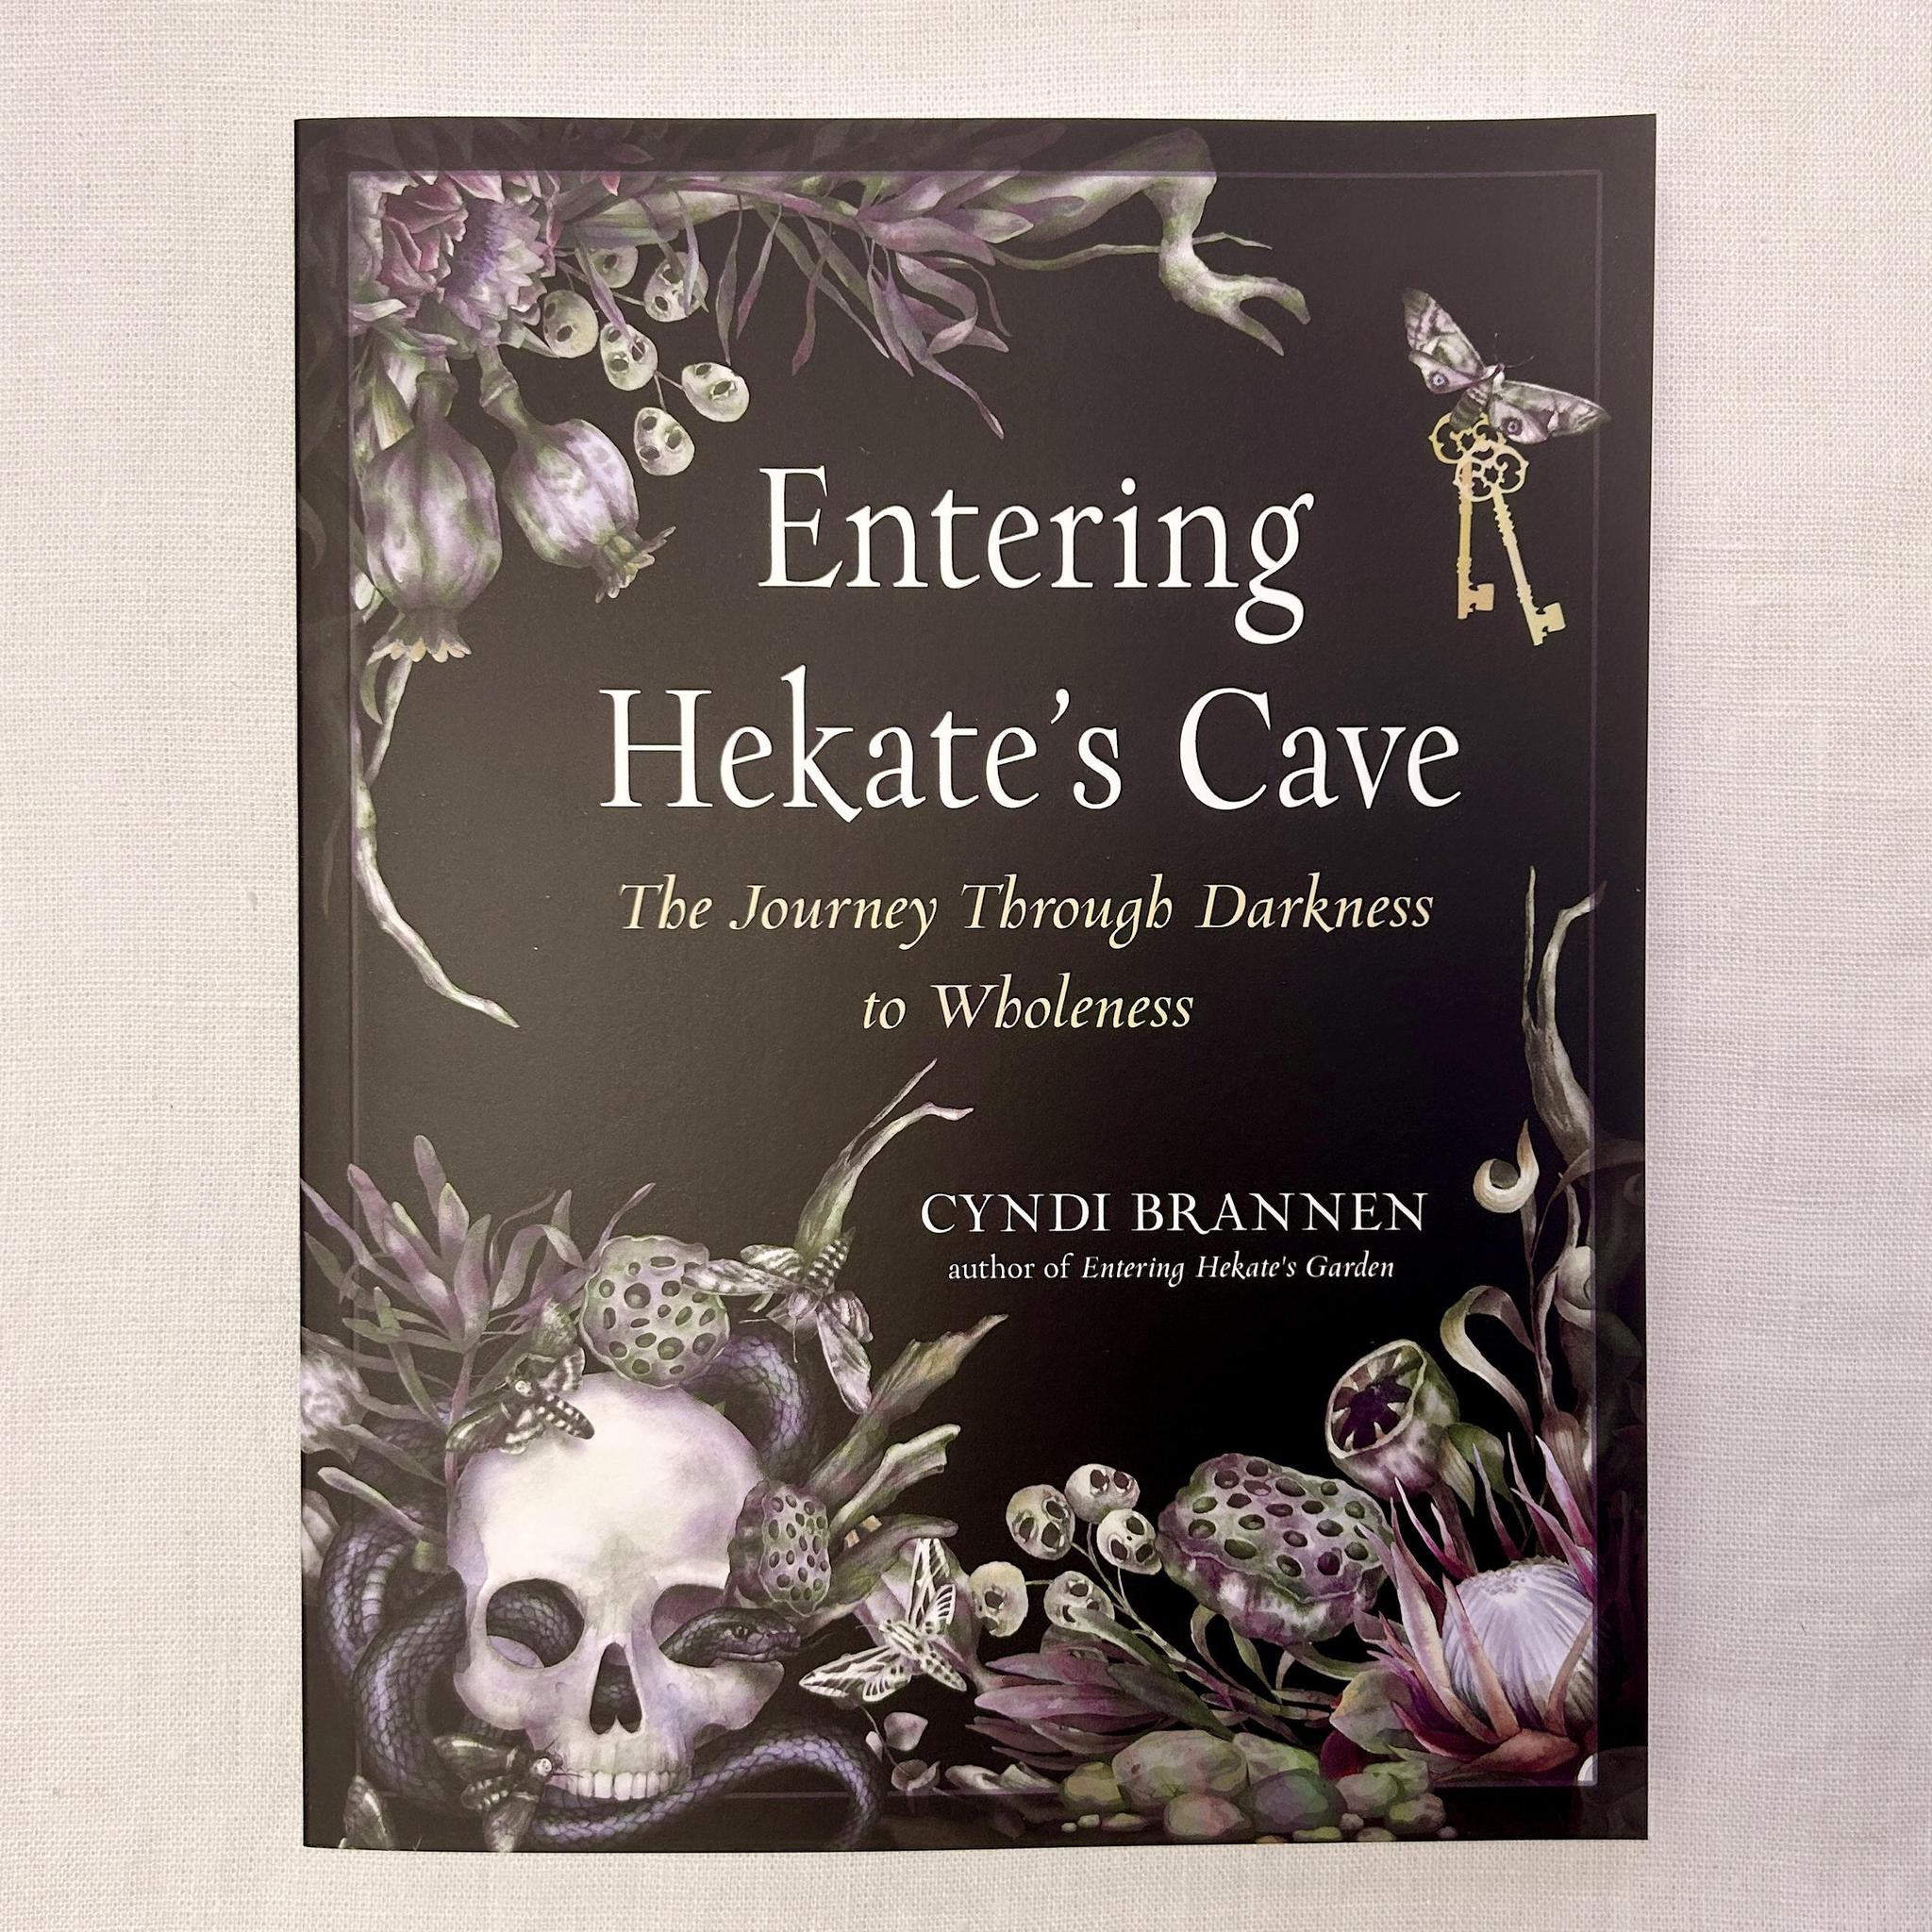 Entering Hekate's Cave book: the journey through darkness to wholeness